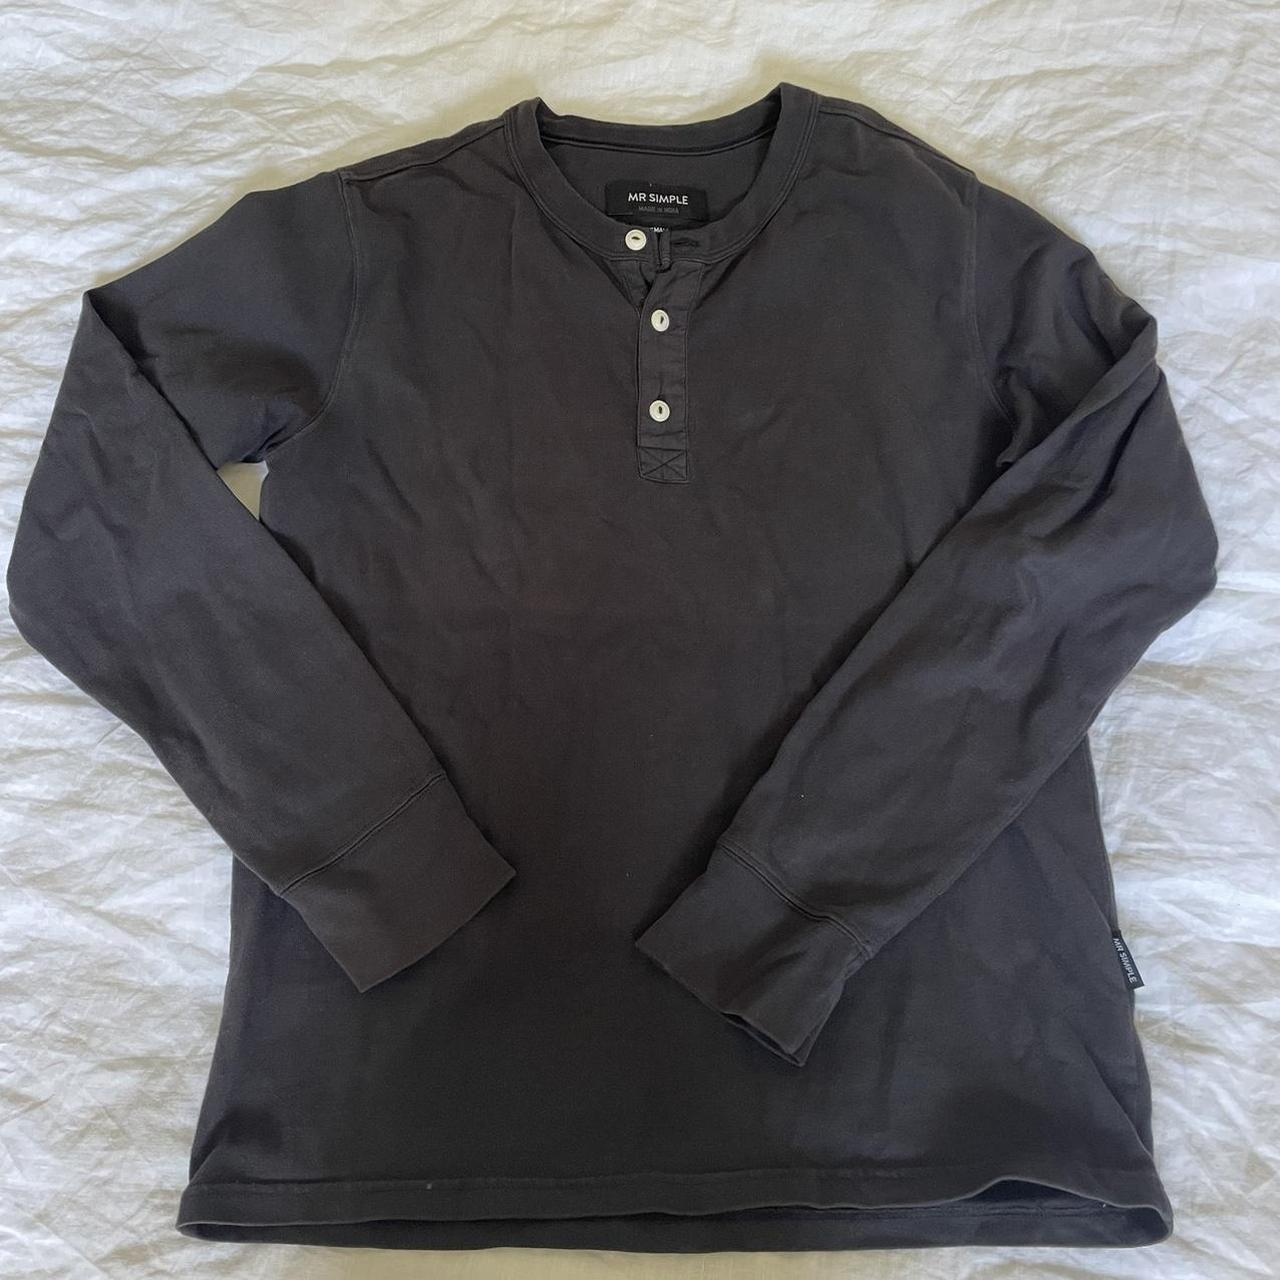 Unisex long-sleeve top/thin jumper Purchased in... - Depop